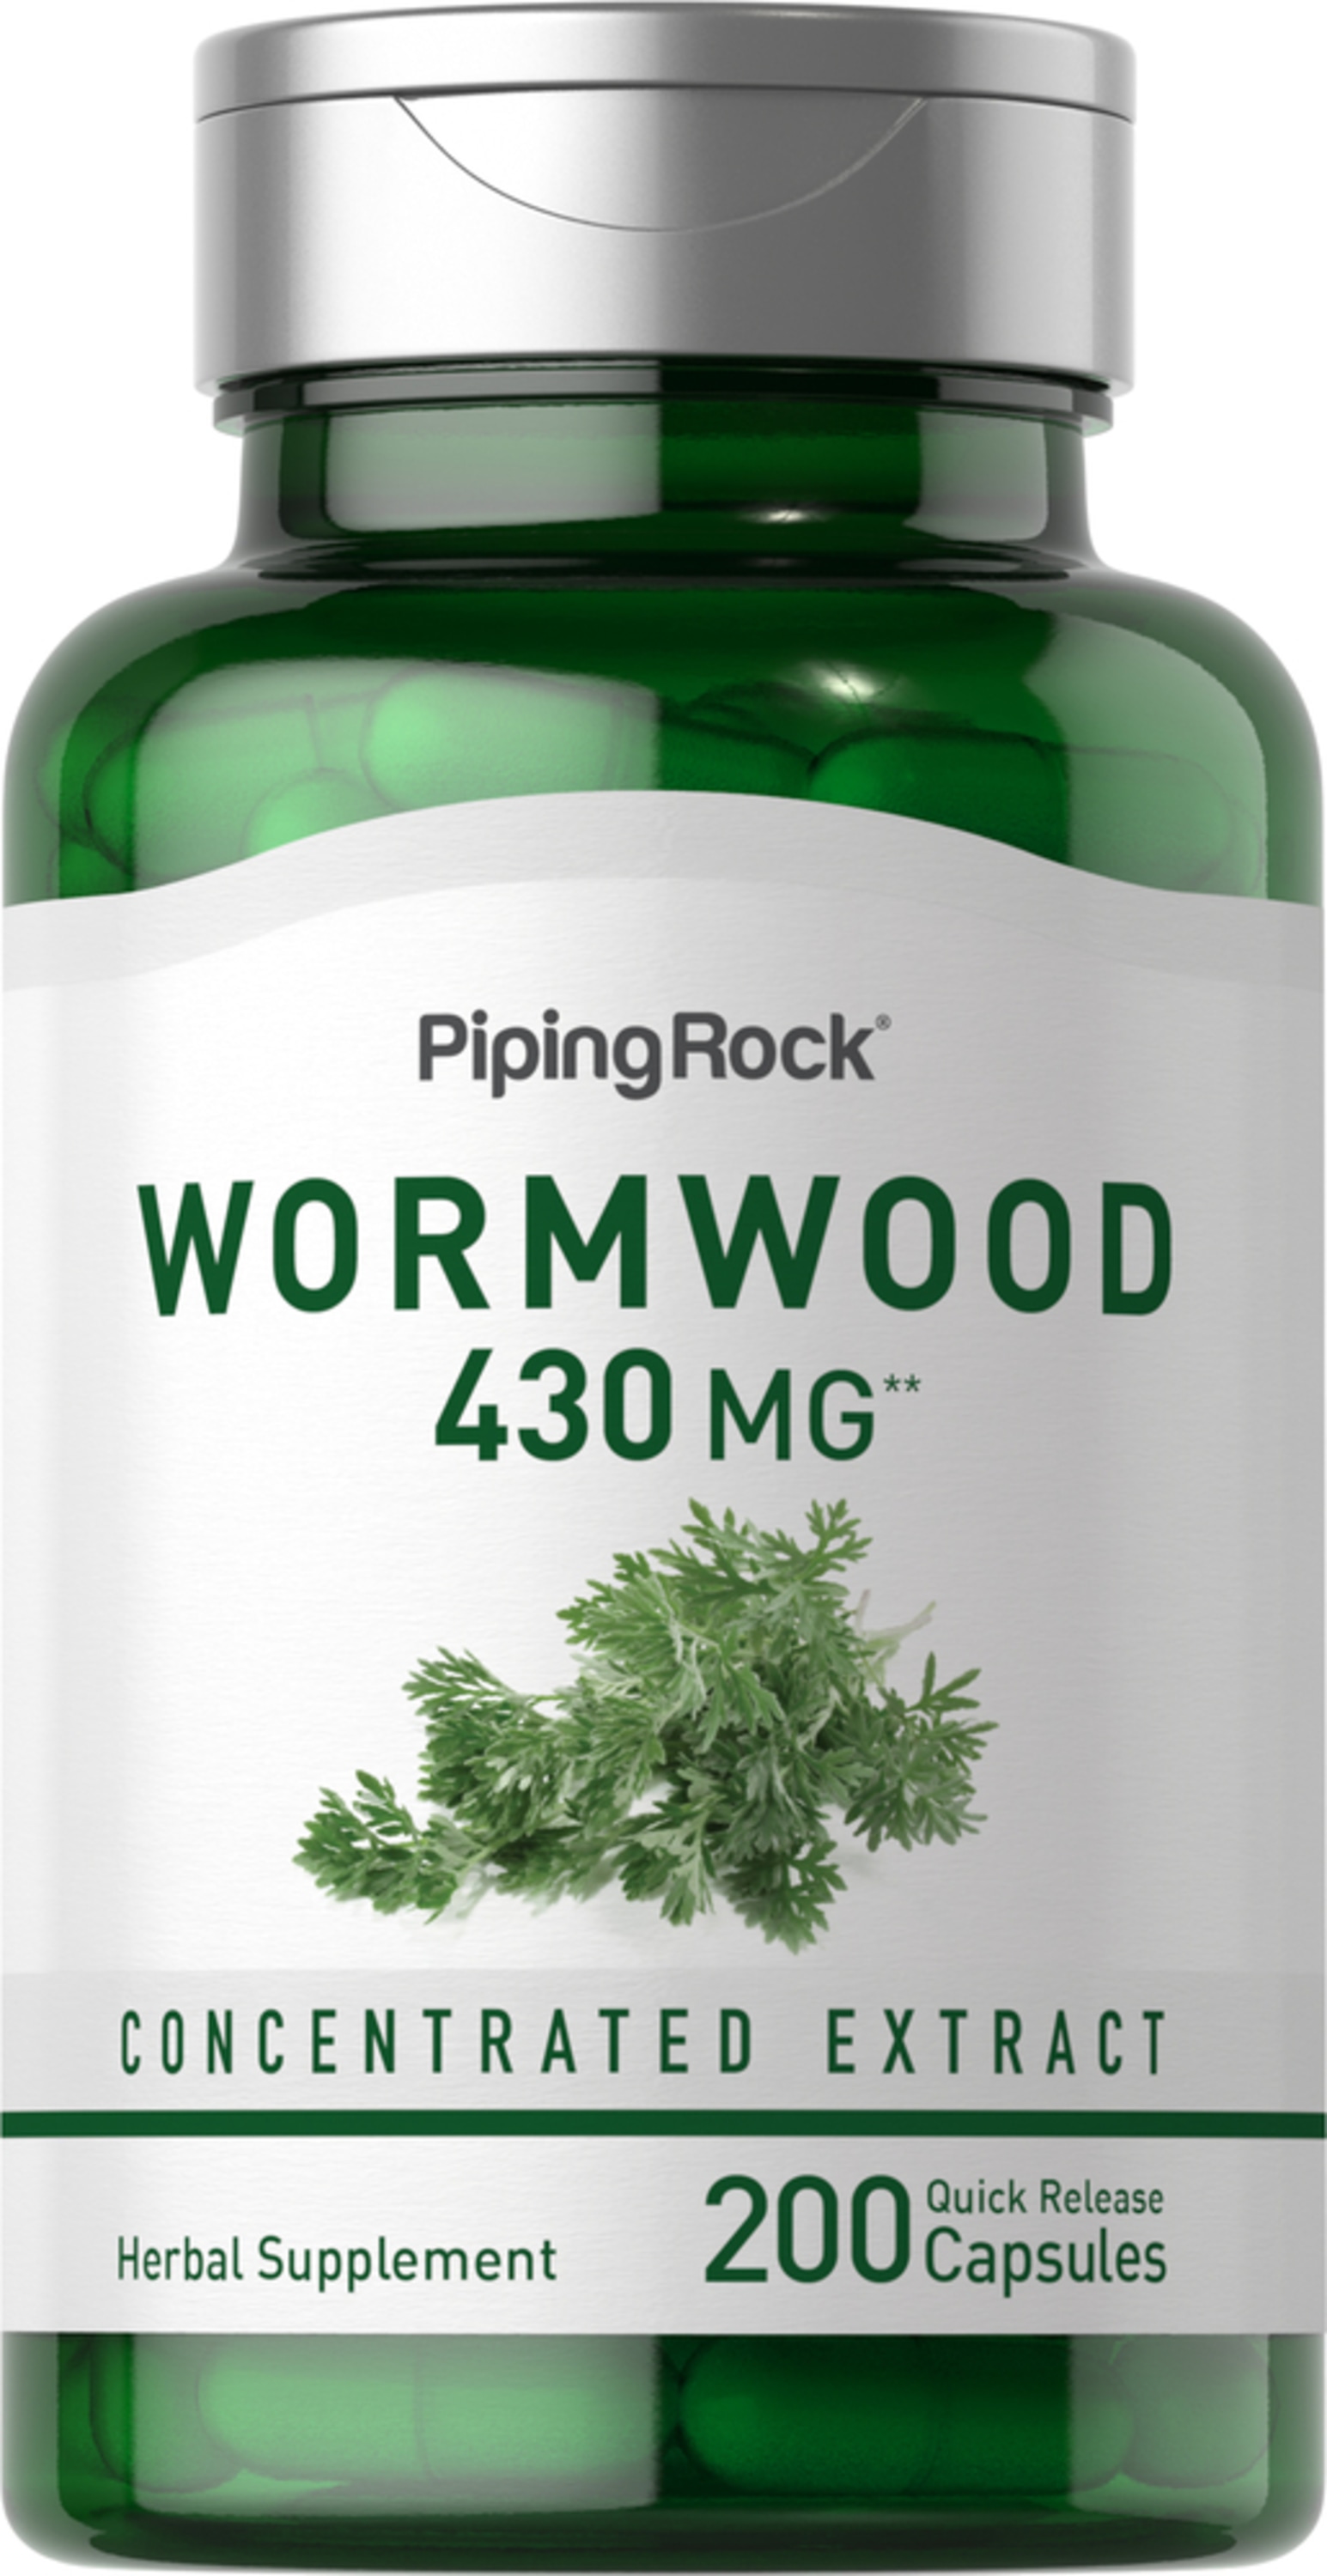 https://cdn2.pipingrock.com/images/product/amazon/product/wormwood-artemisia-annua-430-mg-200-quick-release-capsules-5822.jpg?tx=w_3000,h_3000,c_fit&v=3